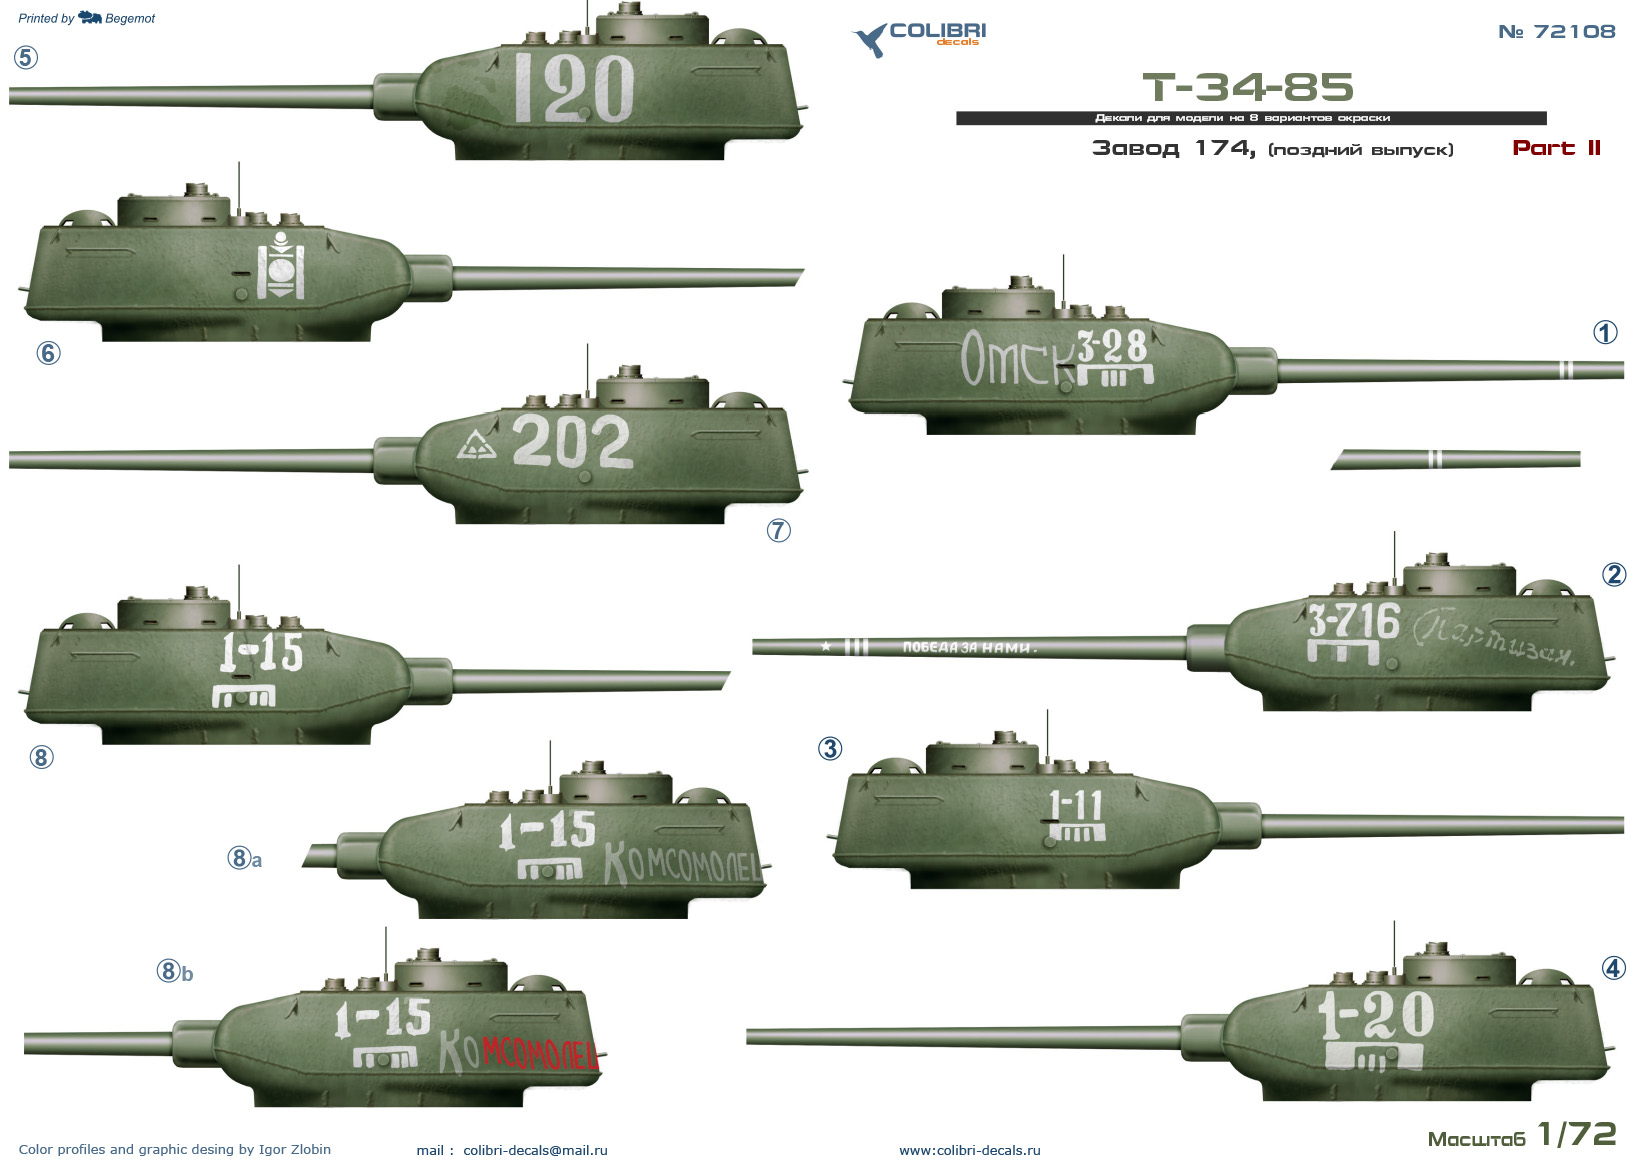 Decal 1/72 T-34-85 factory 174. Part II (Colibri Decals)